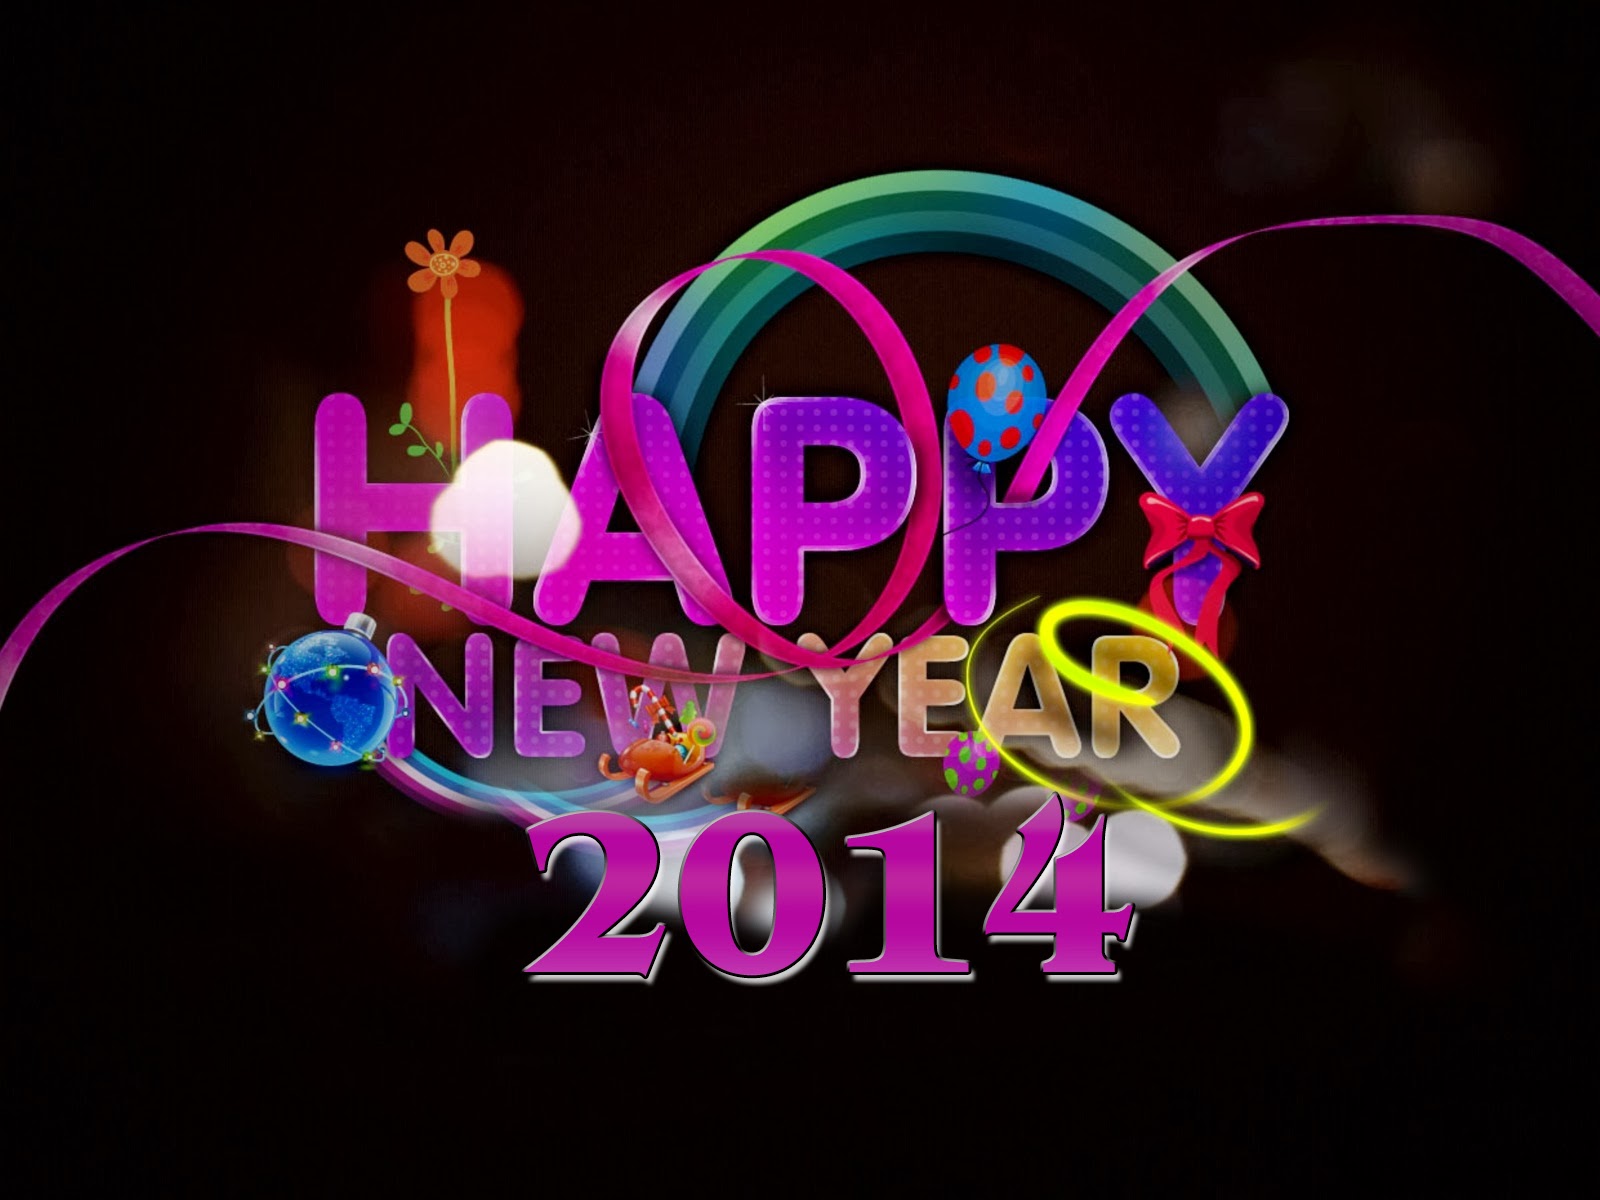 Collection of HD wallpaper life: Happy New Year Wallpapers